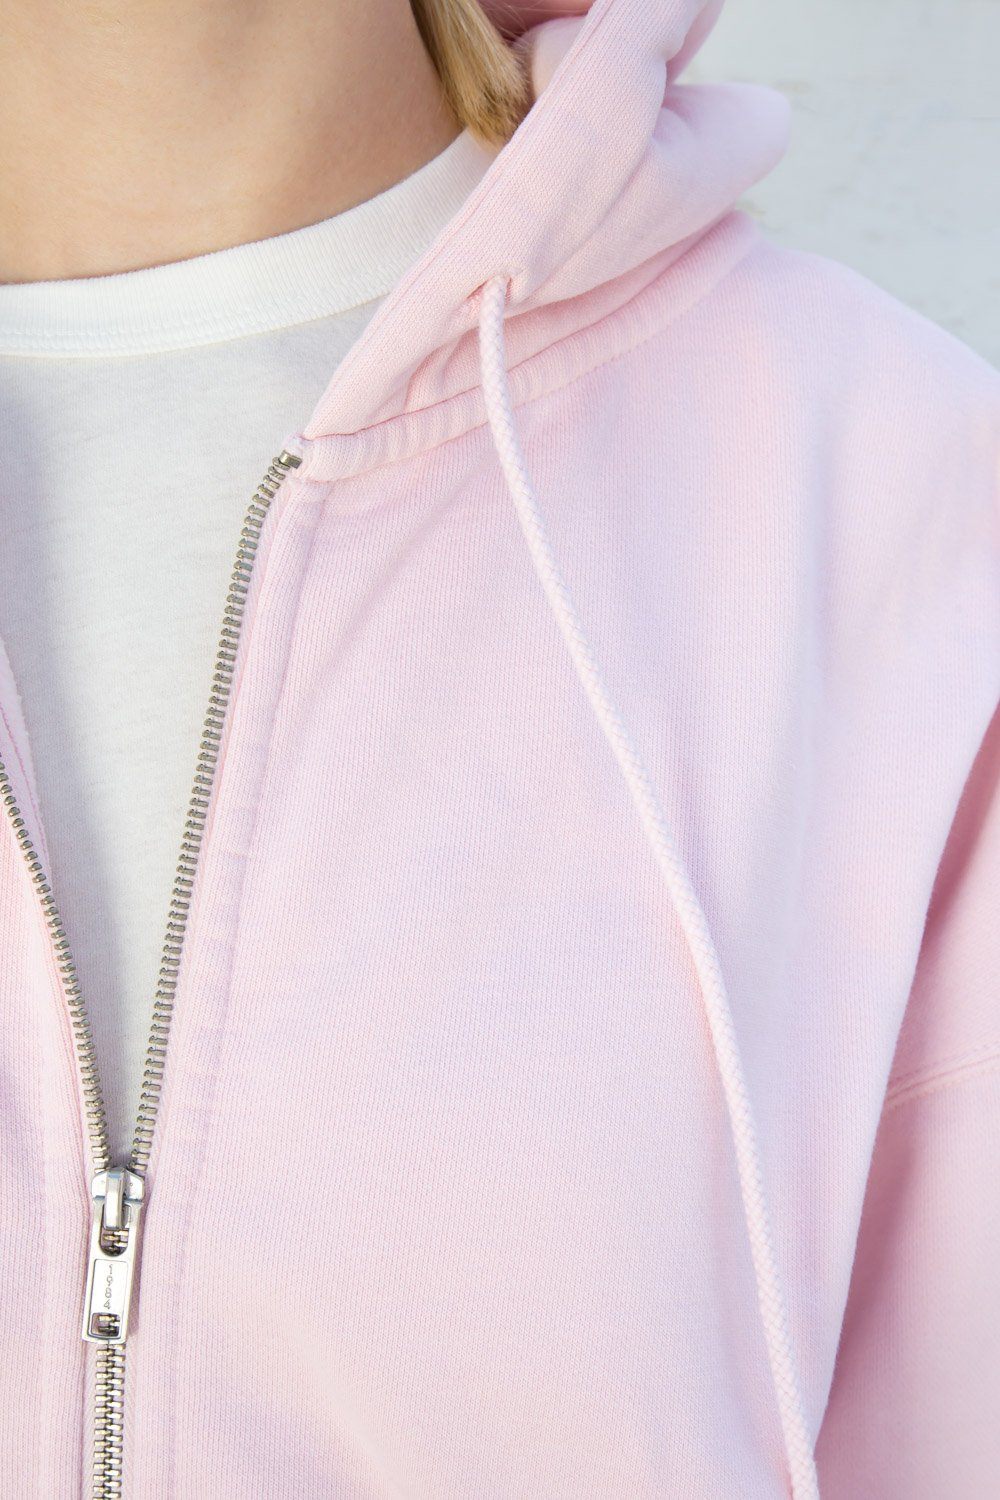 Brandy Melville Christy Hoodie Pink - $33 New With Tags - From Gisselle